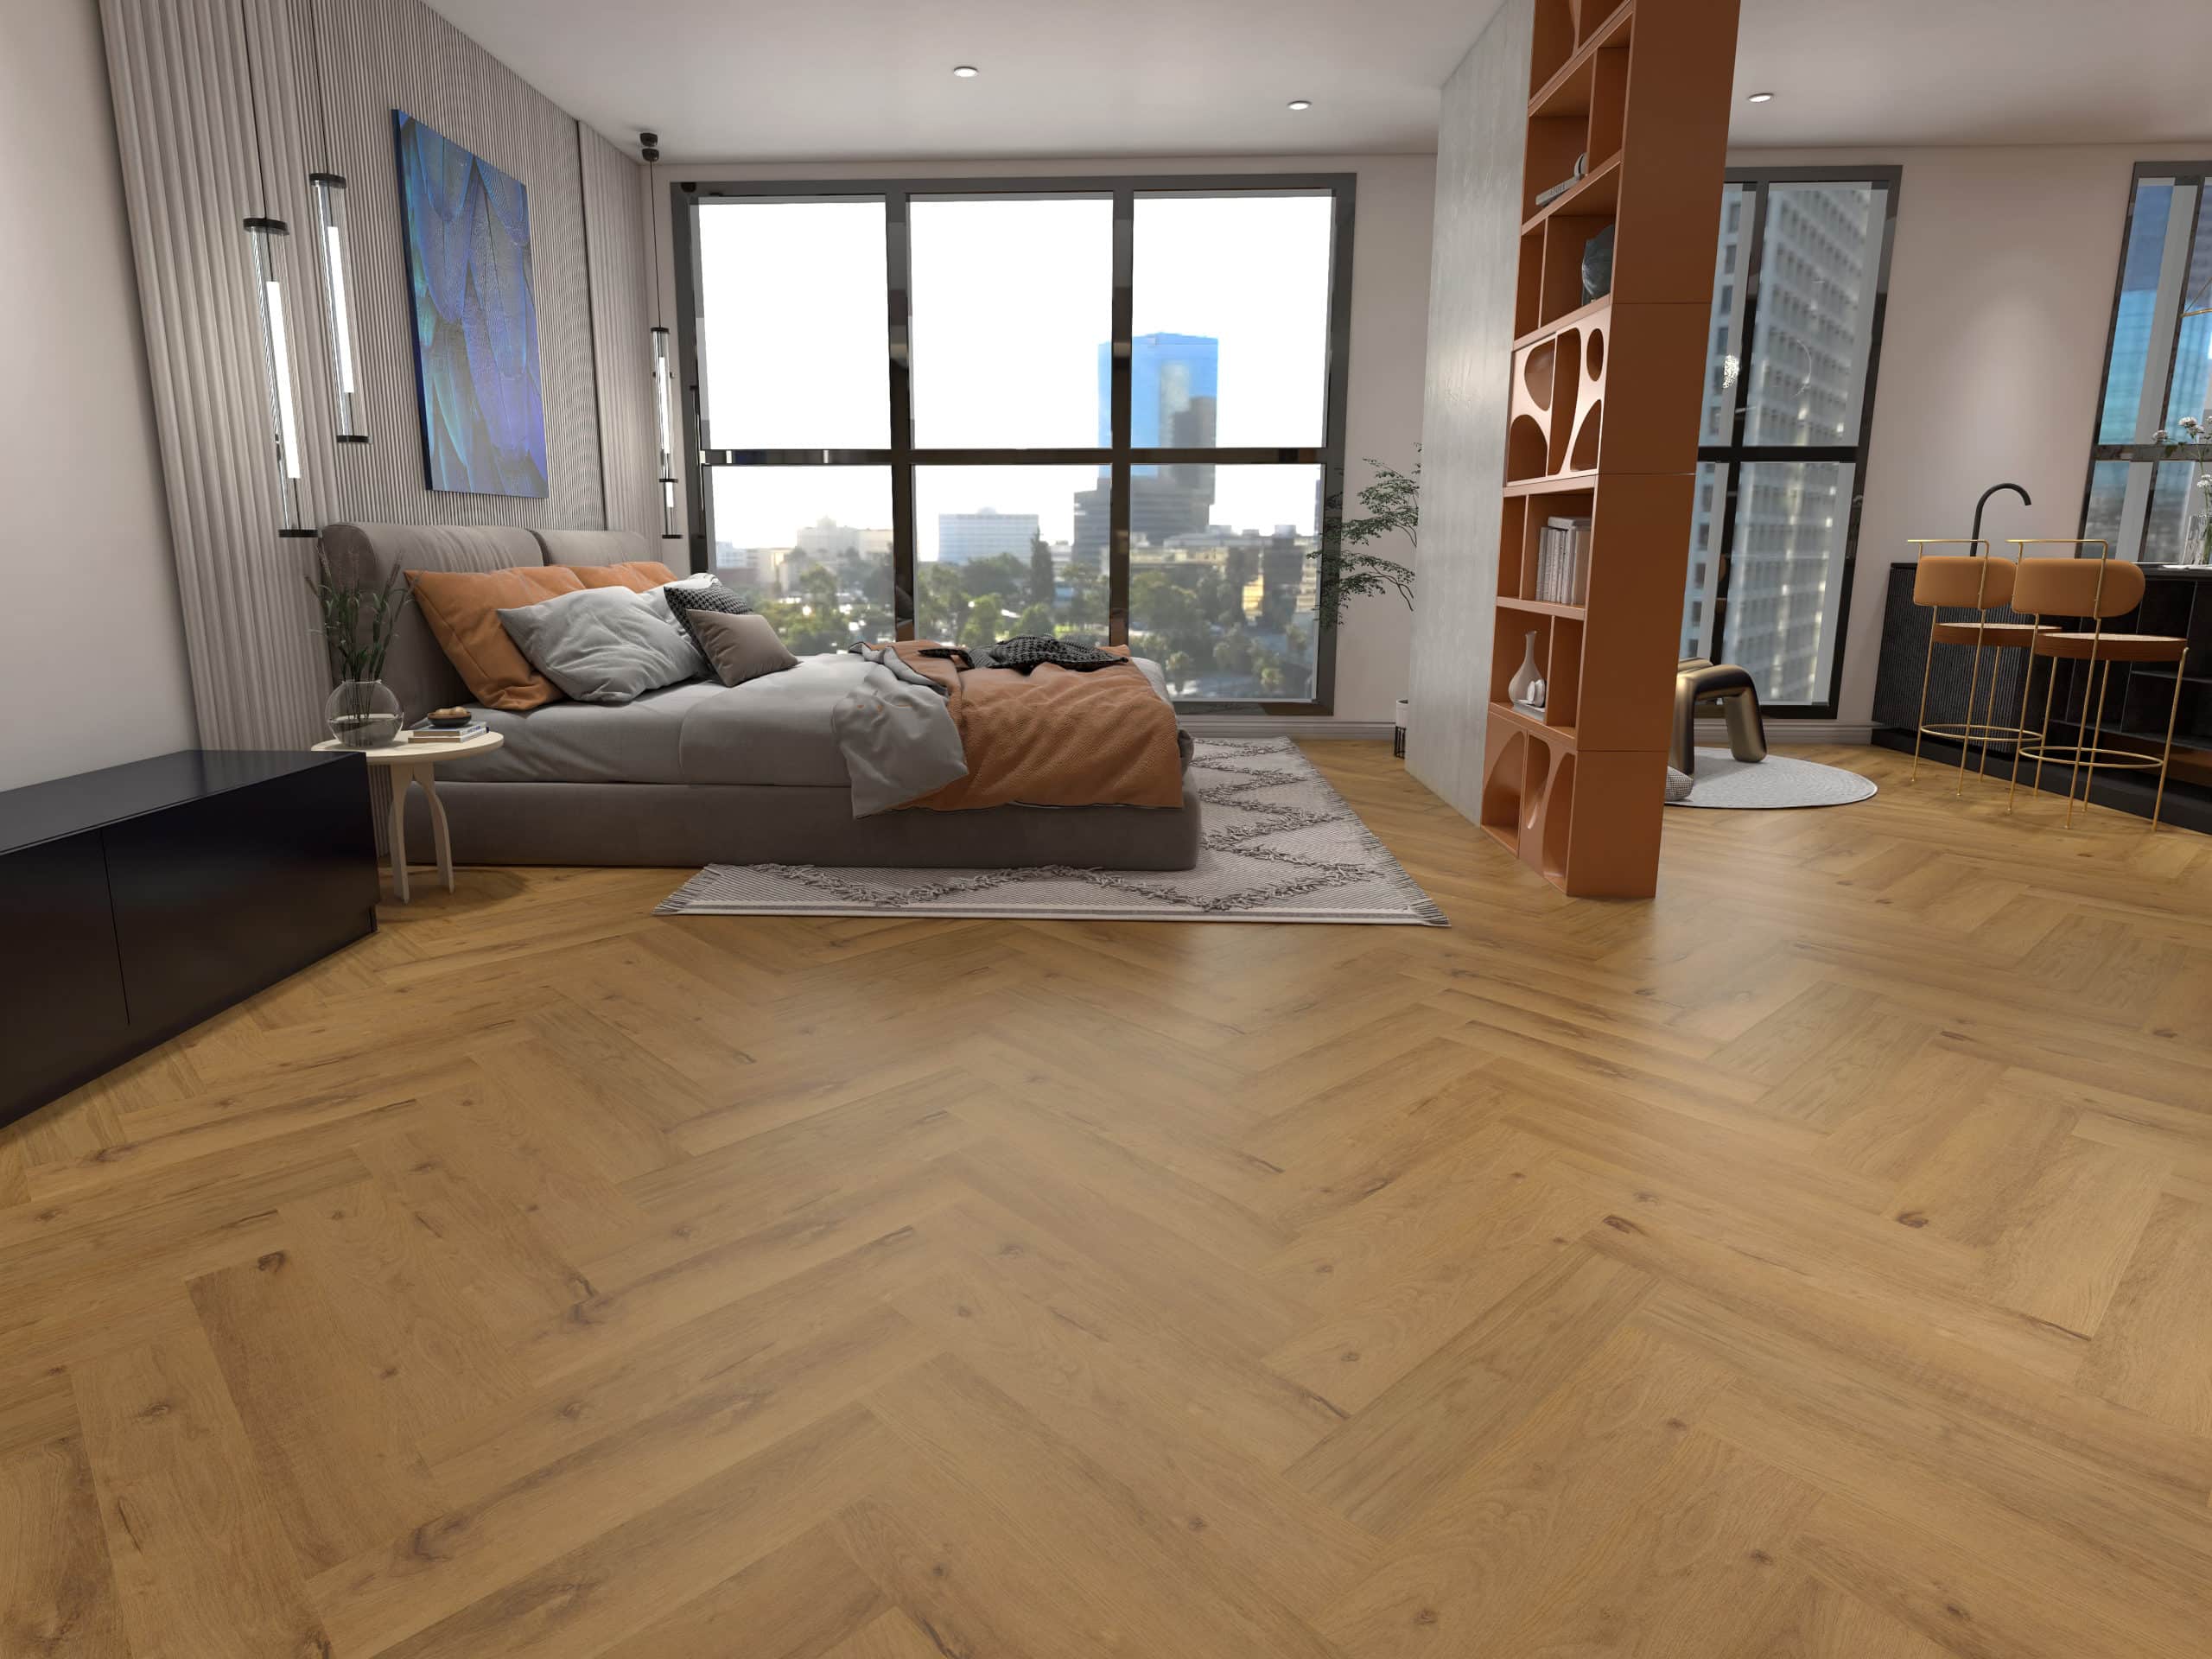 showing a room with the floor covered by hybrid vinyl plank flooring that ihybrid vinyl plank flooring, spotted gum